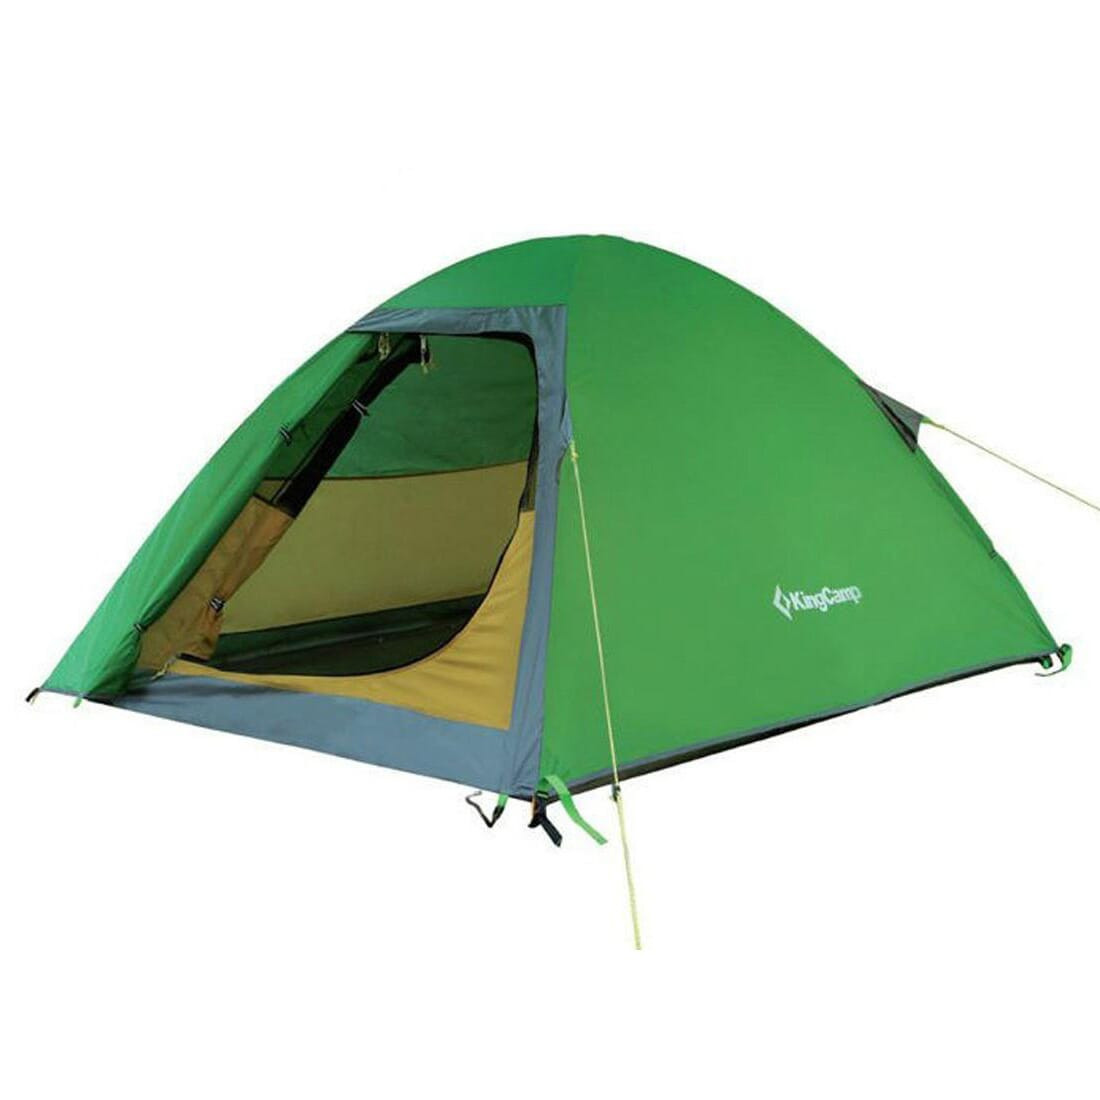 KingCamp Victoria Tent for Trekking, Hiking